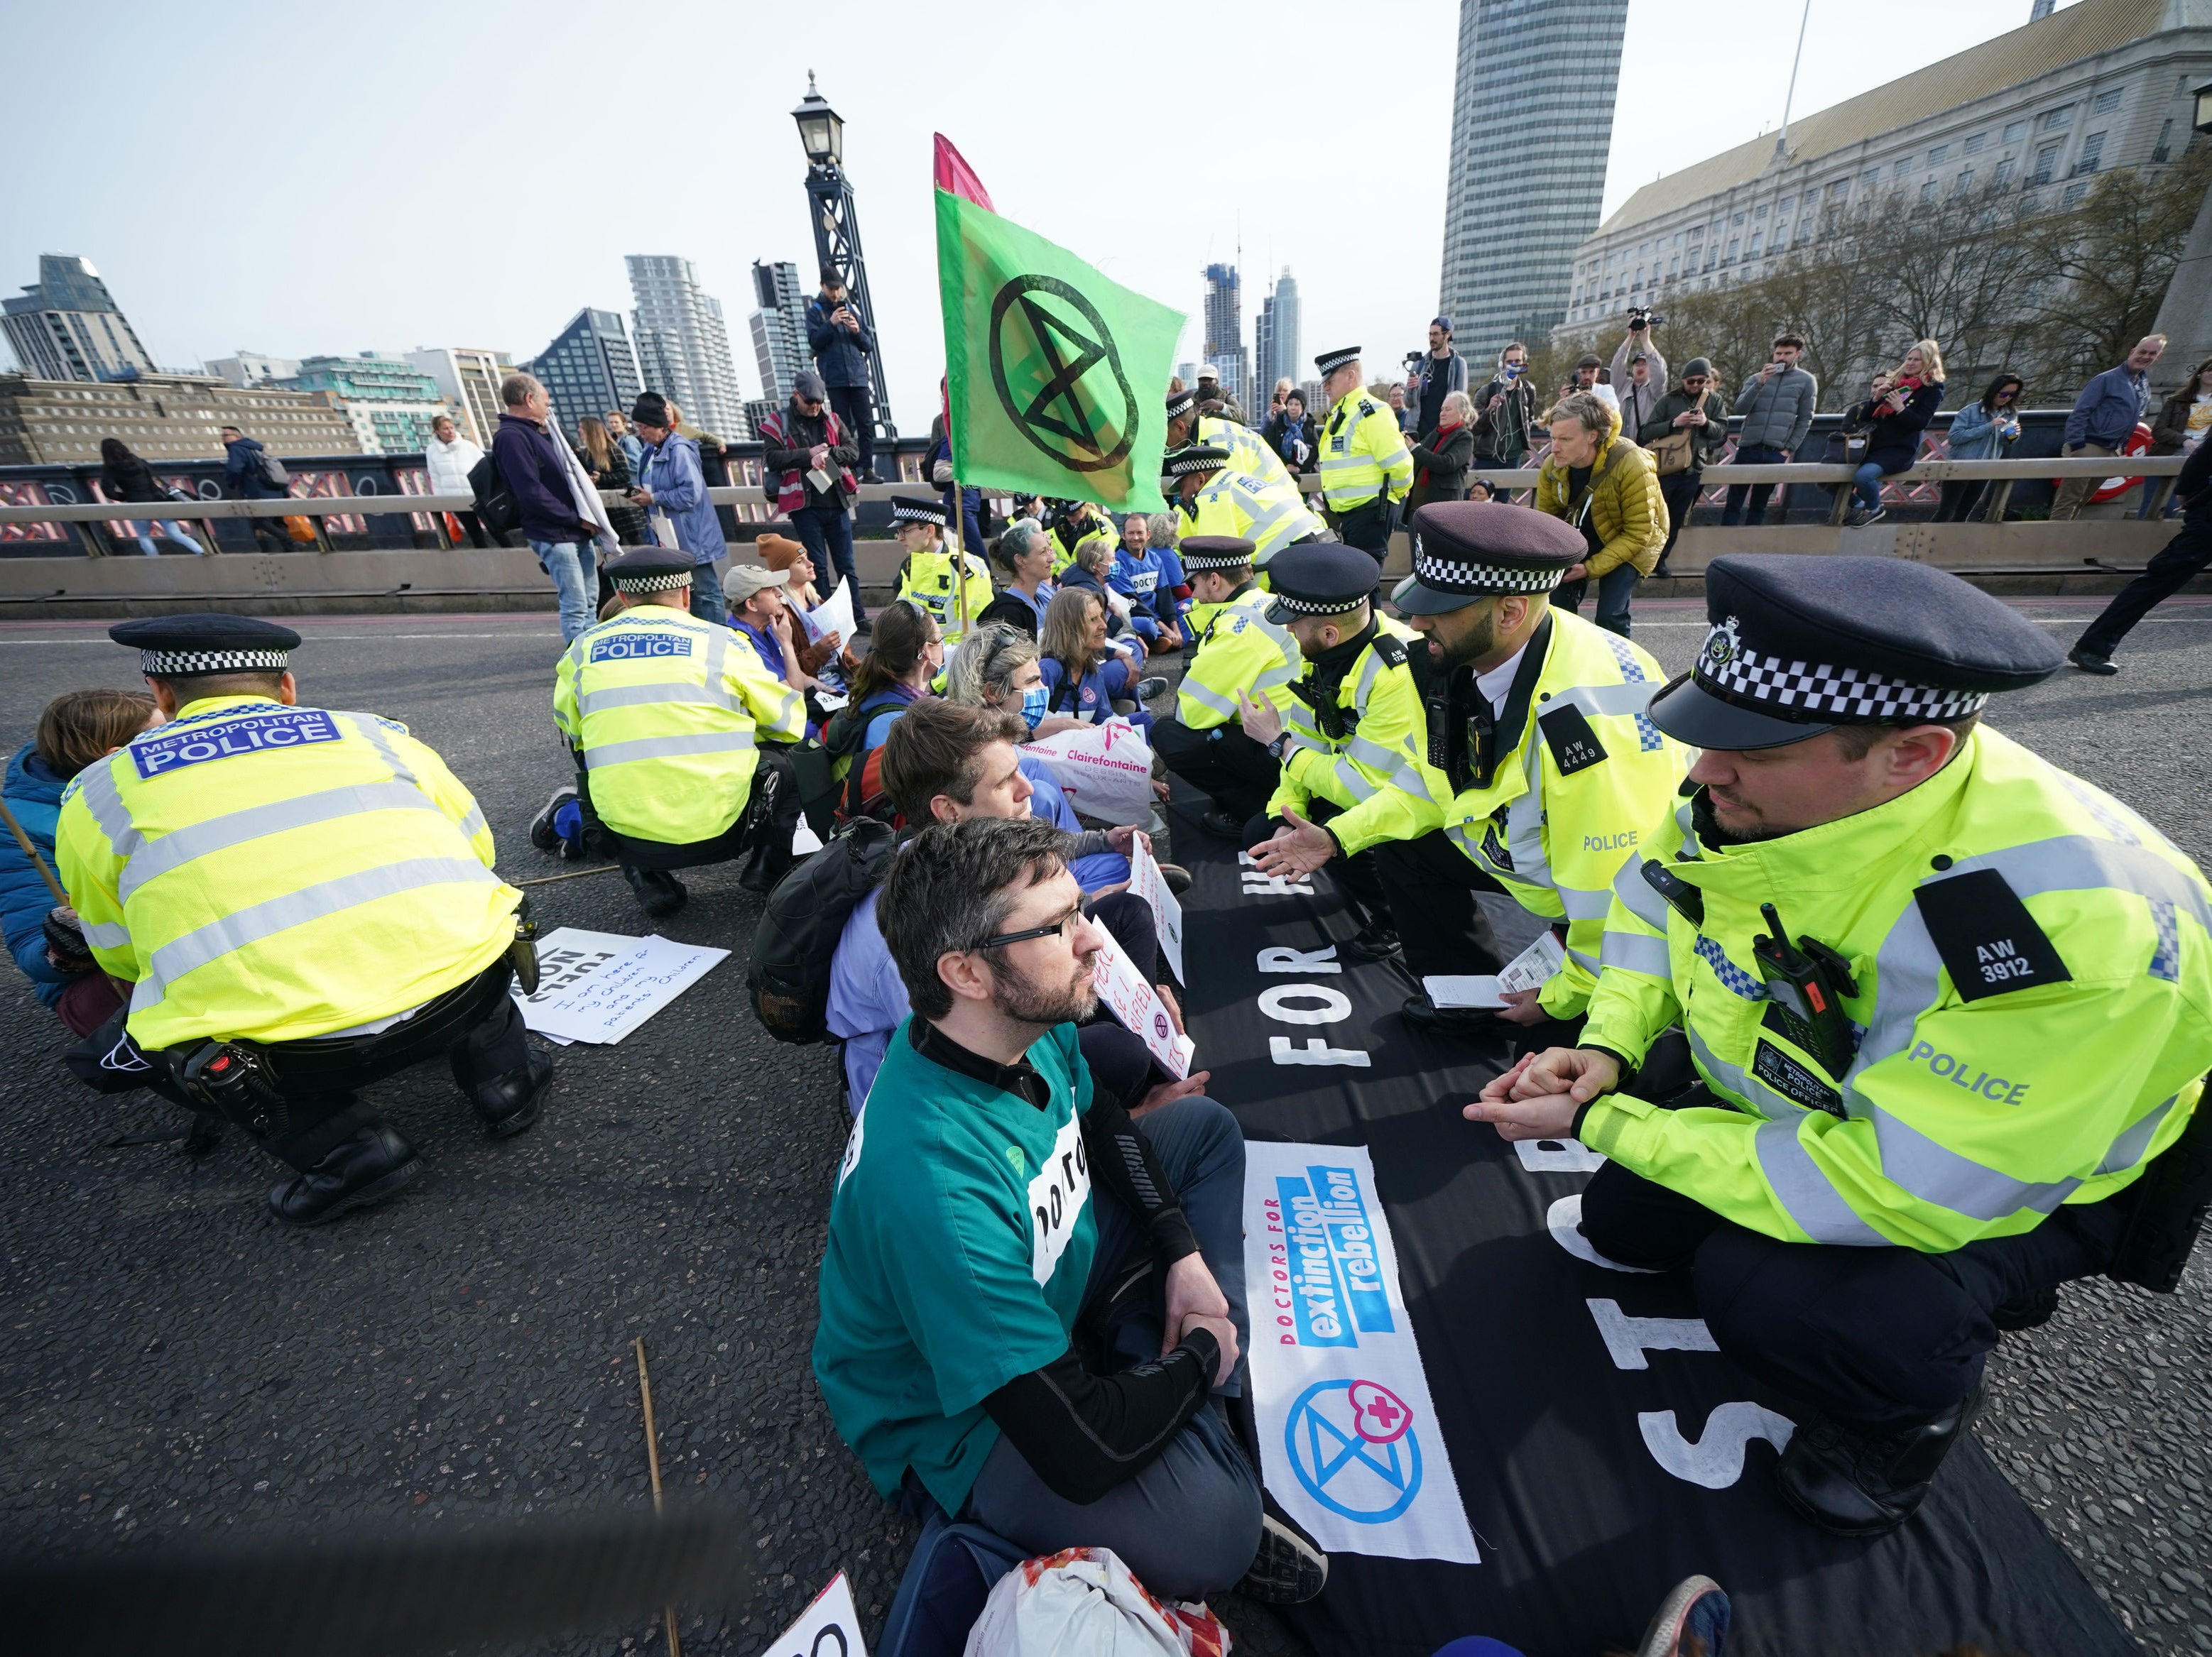 Police talk to protestors taking part in a demonstration on Lambeth Bridge in central London